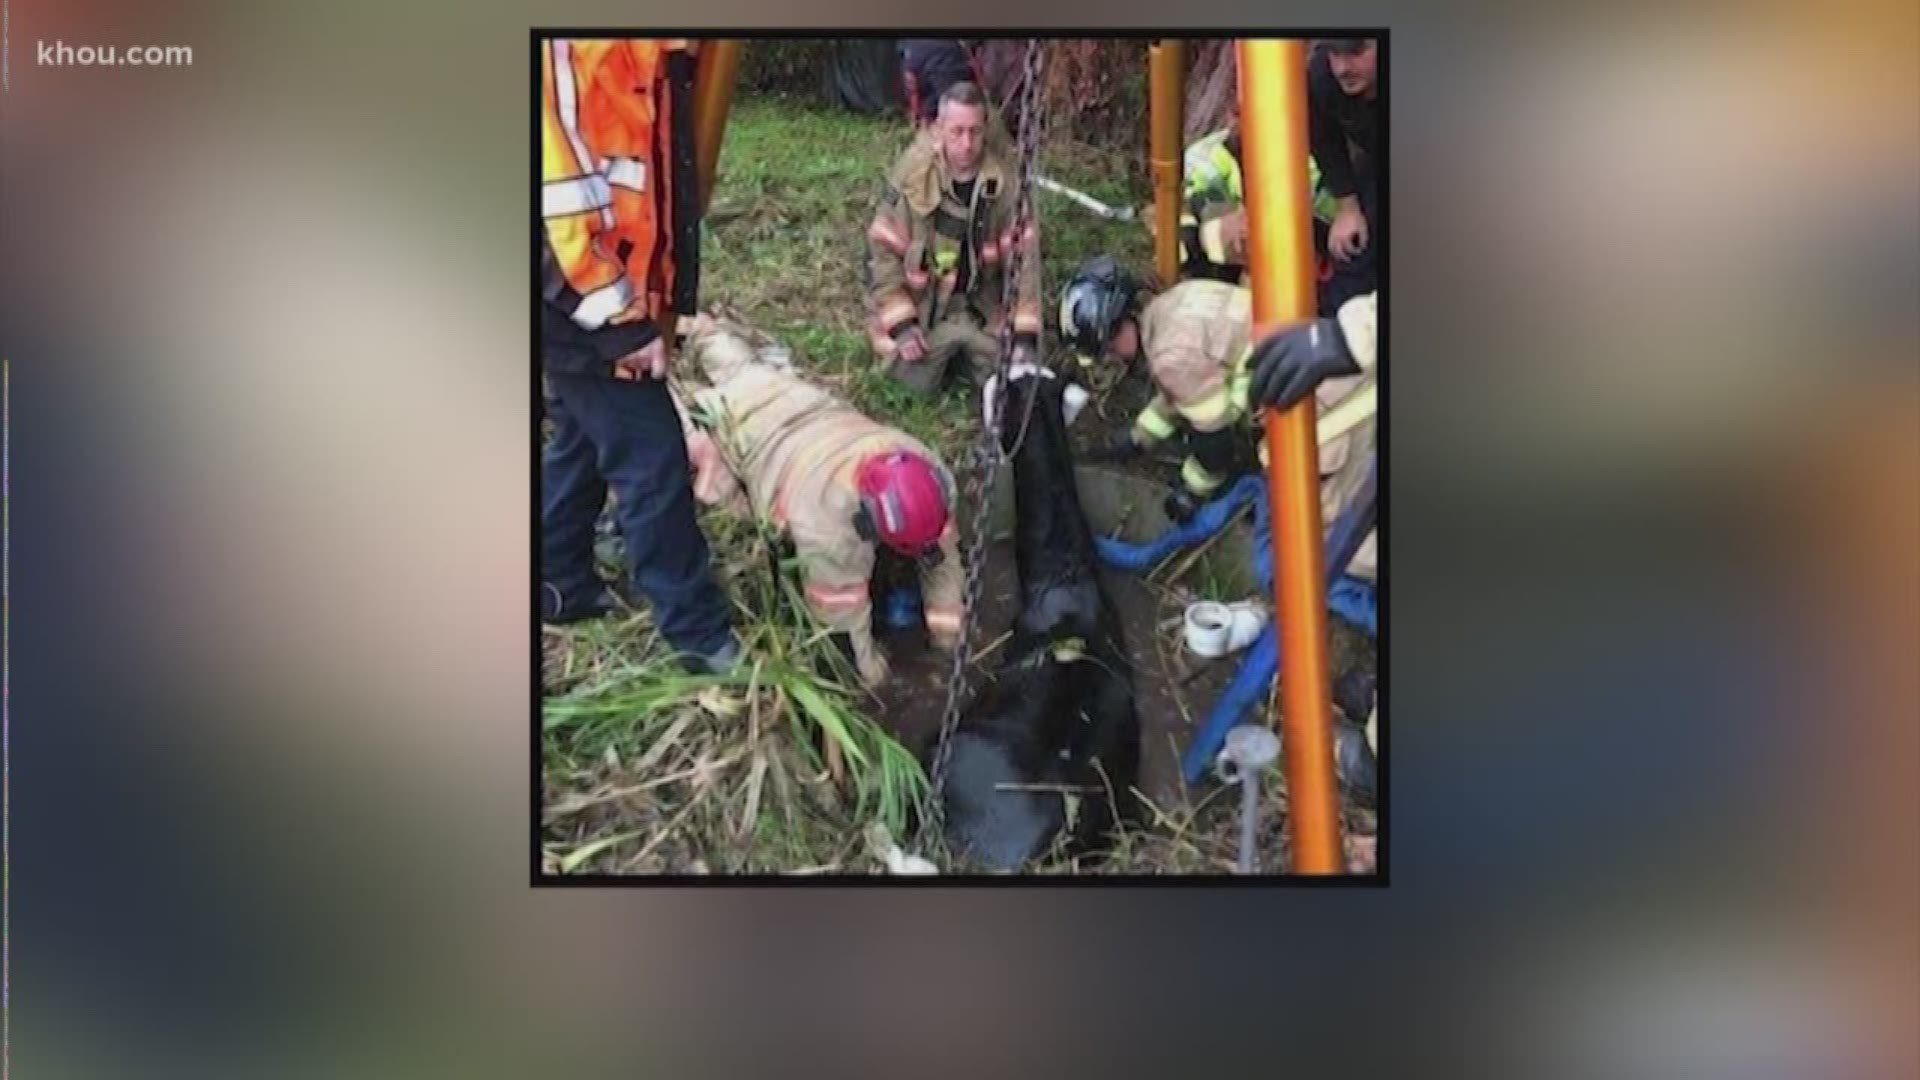 Houston firefighters had to pull a horse out of a sewer hole on Scott Street on Sunday.